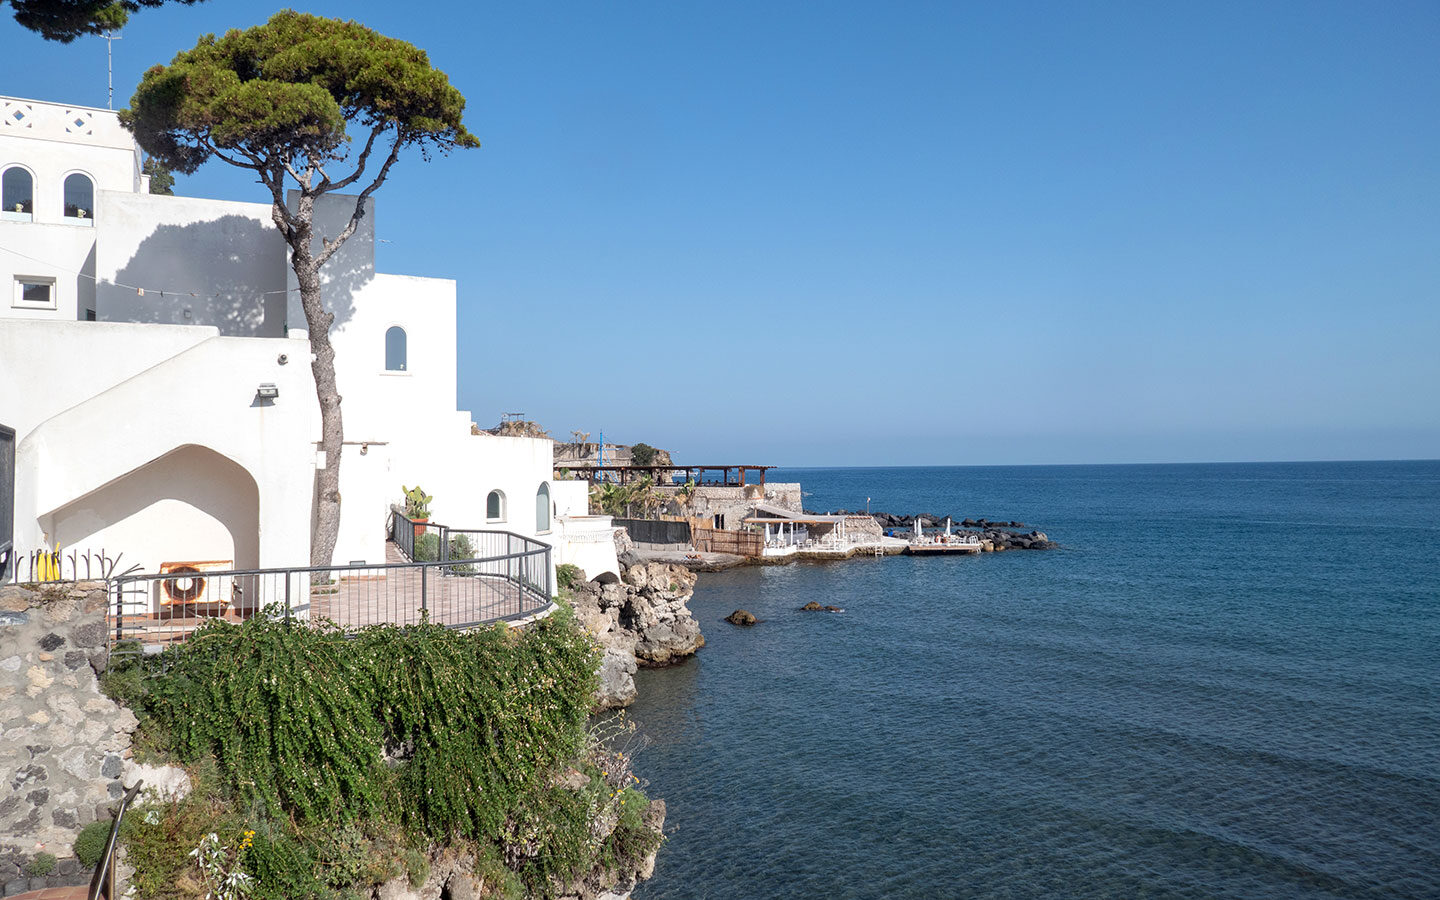 Views from Villa Lentisco beachside hotel in Ischia, Southern Italy